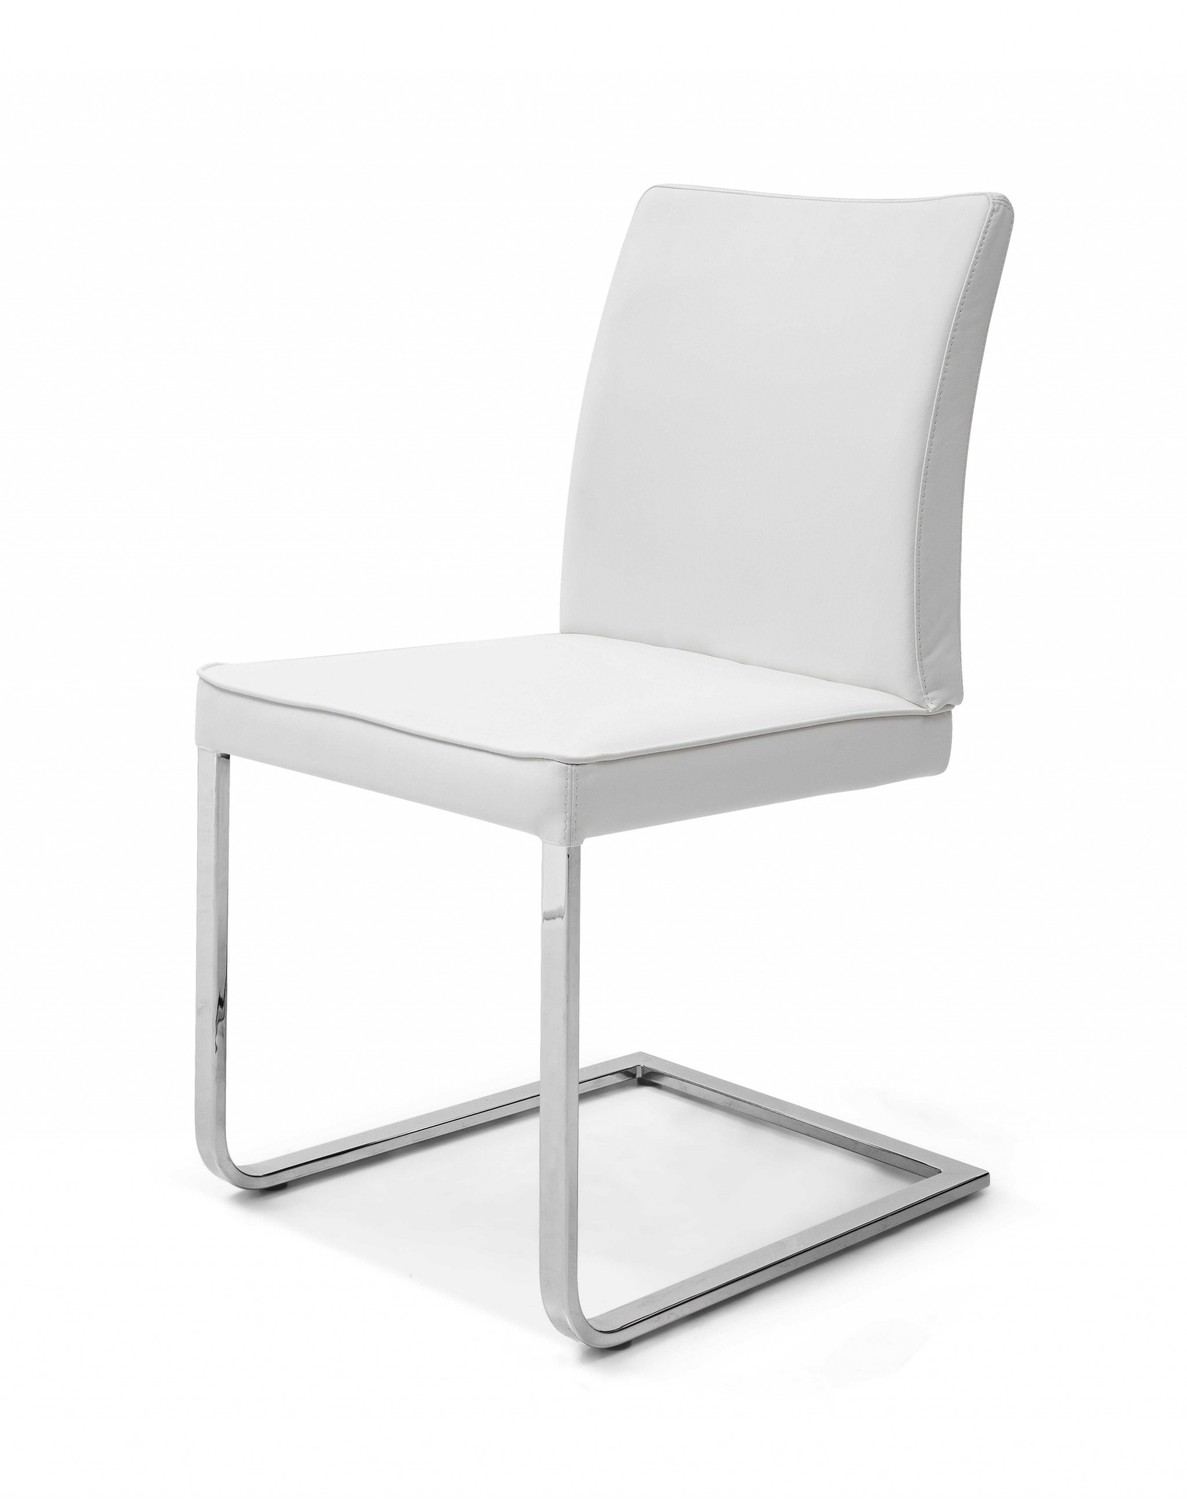 Contemporary White Faux Leather Chrome Dining Chair